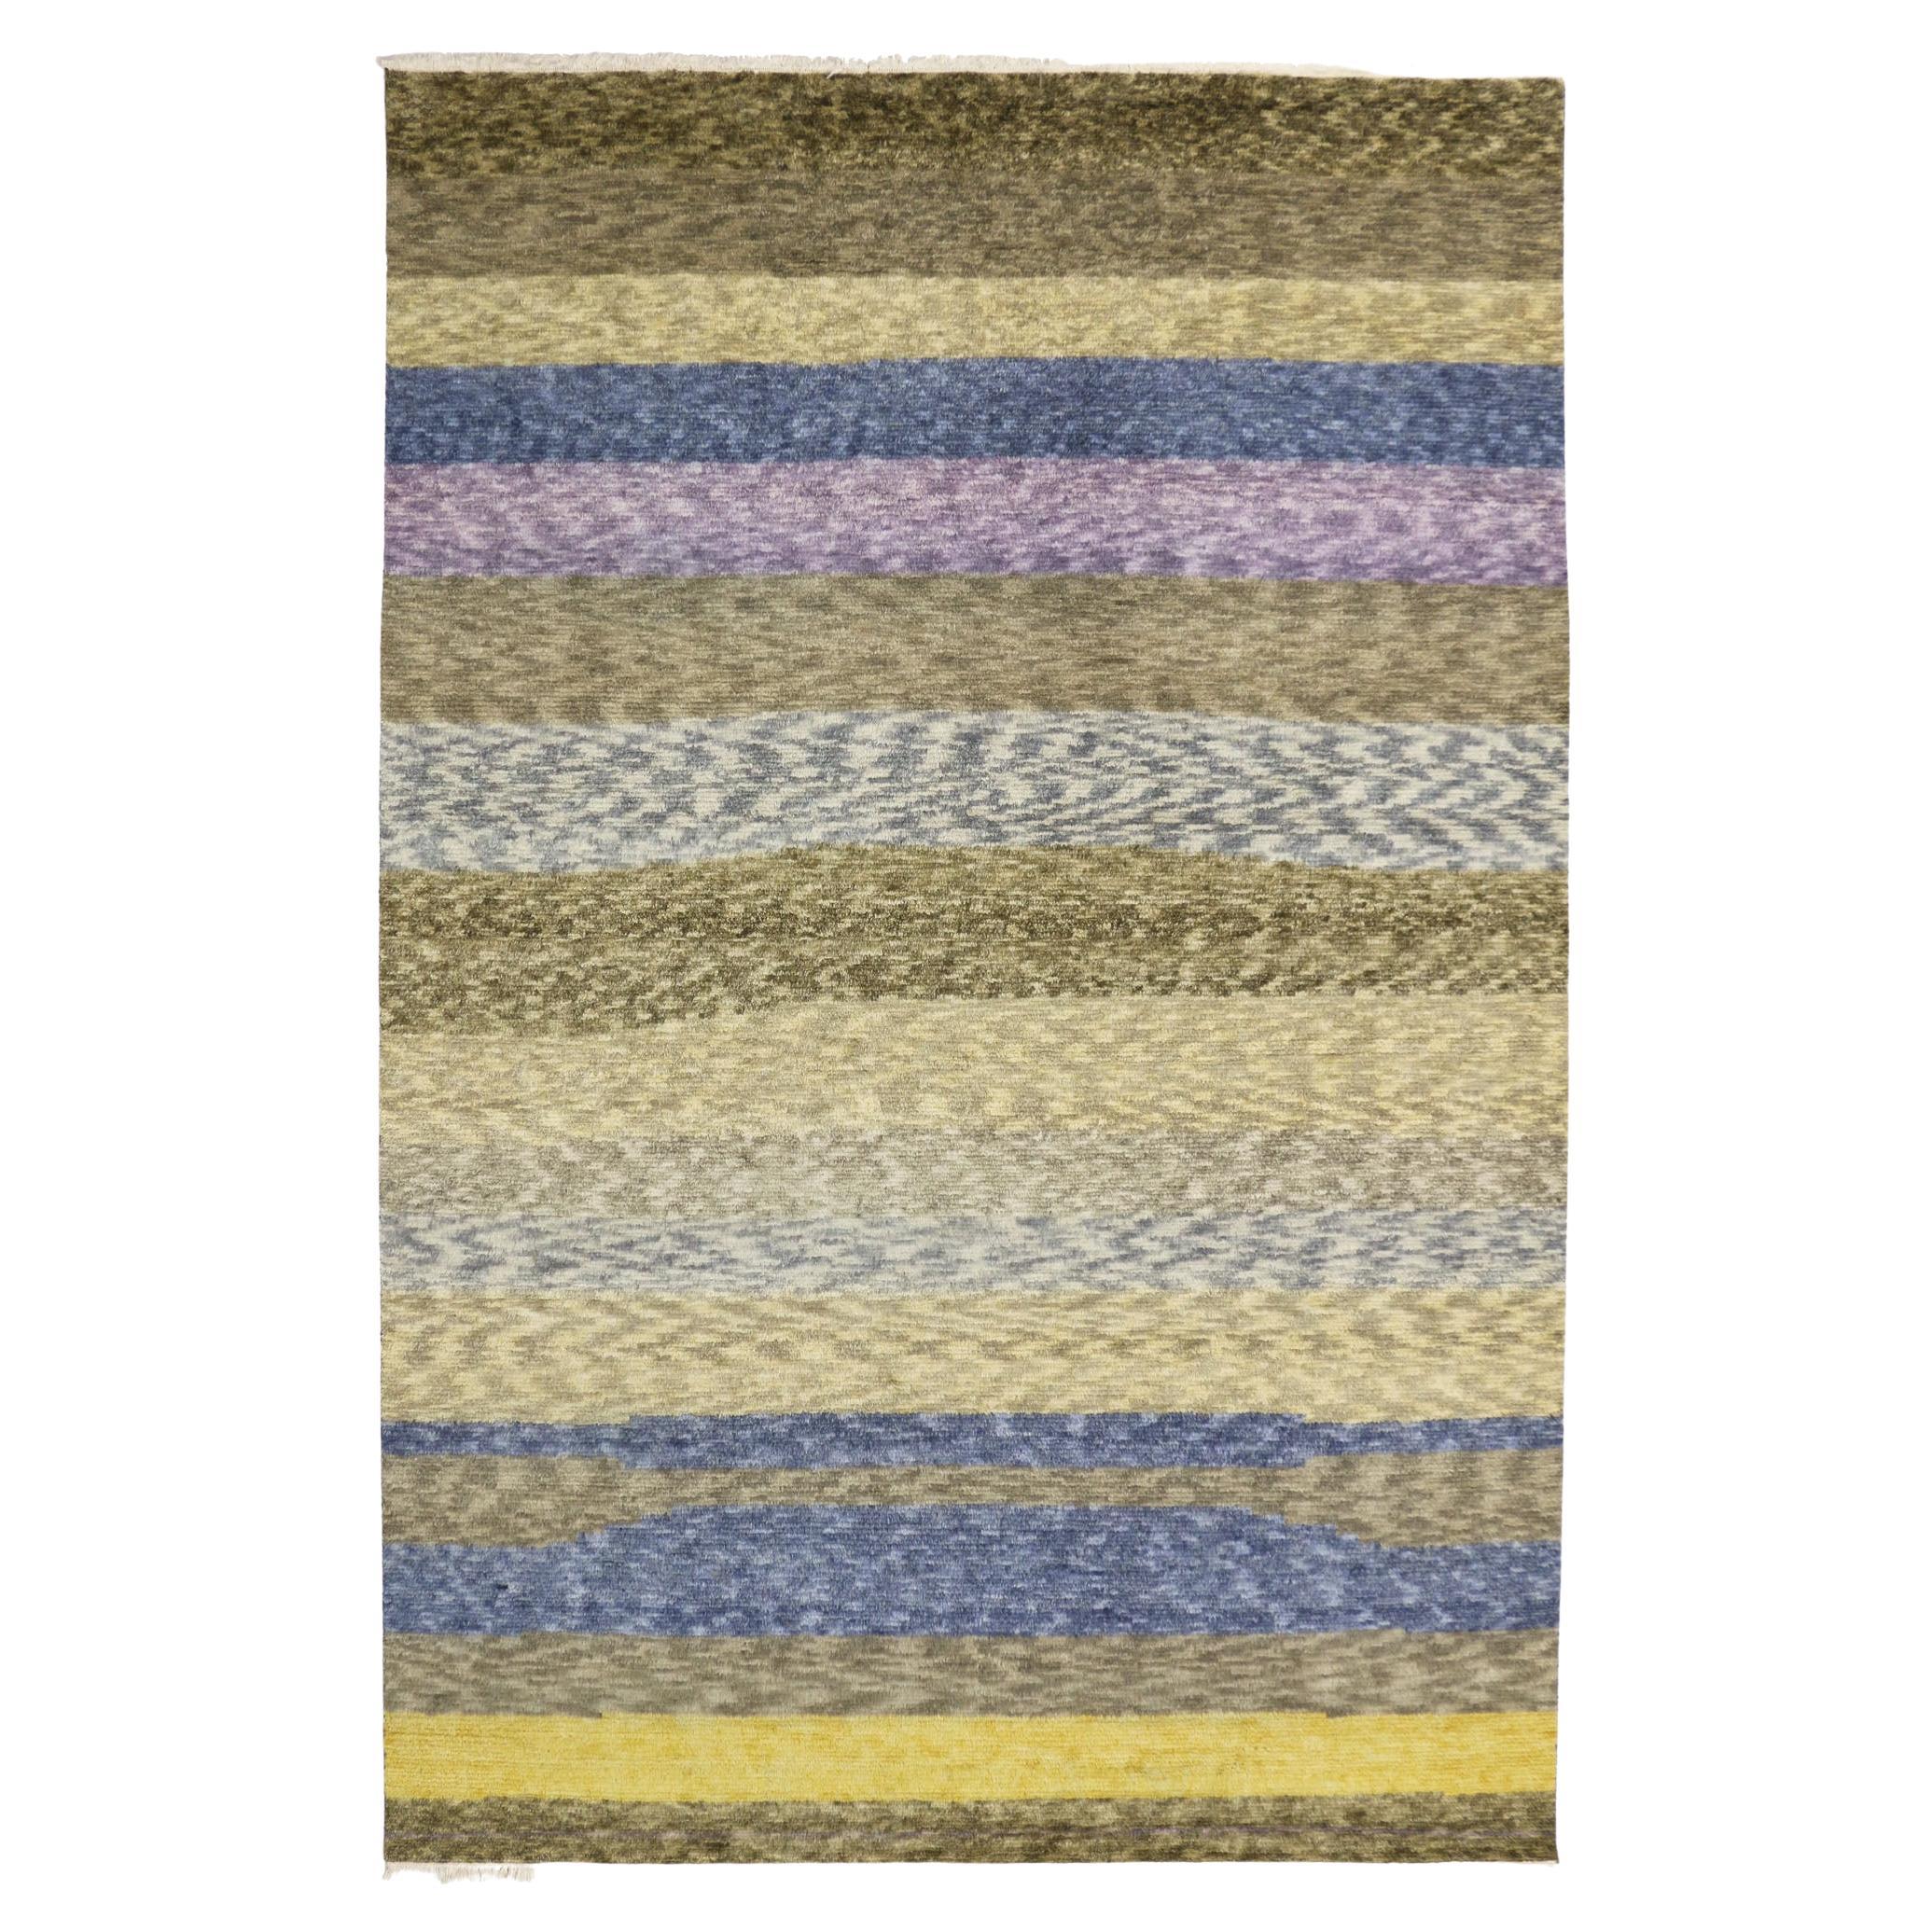 Nature-Inspired Moroccan Rug, Biophilic Design Meets Expressionist Style